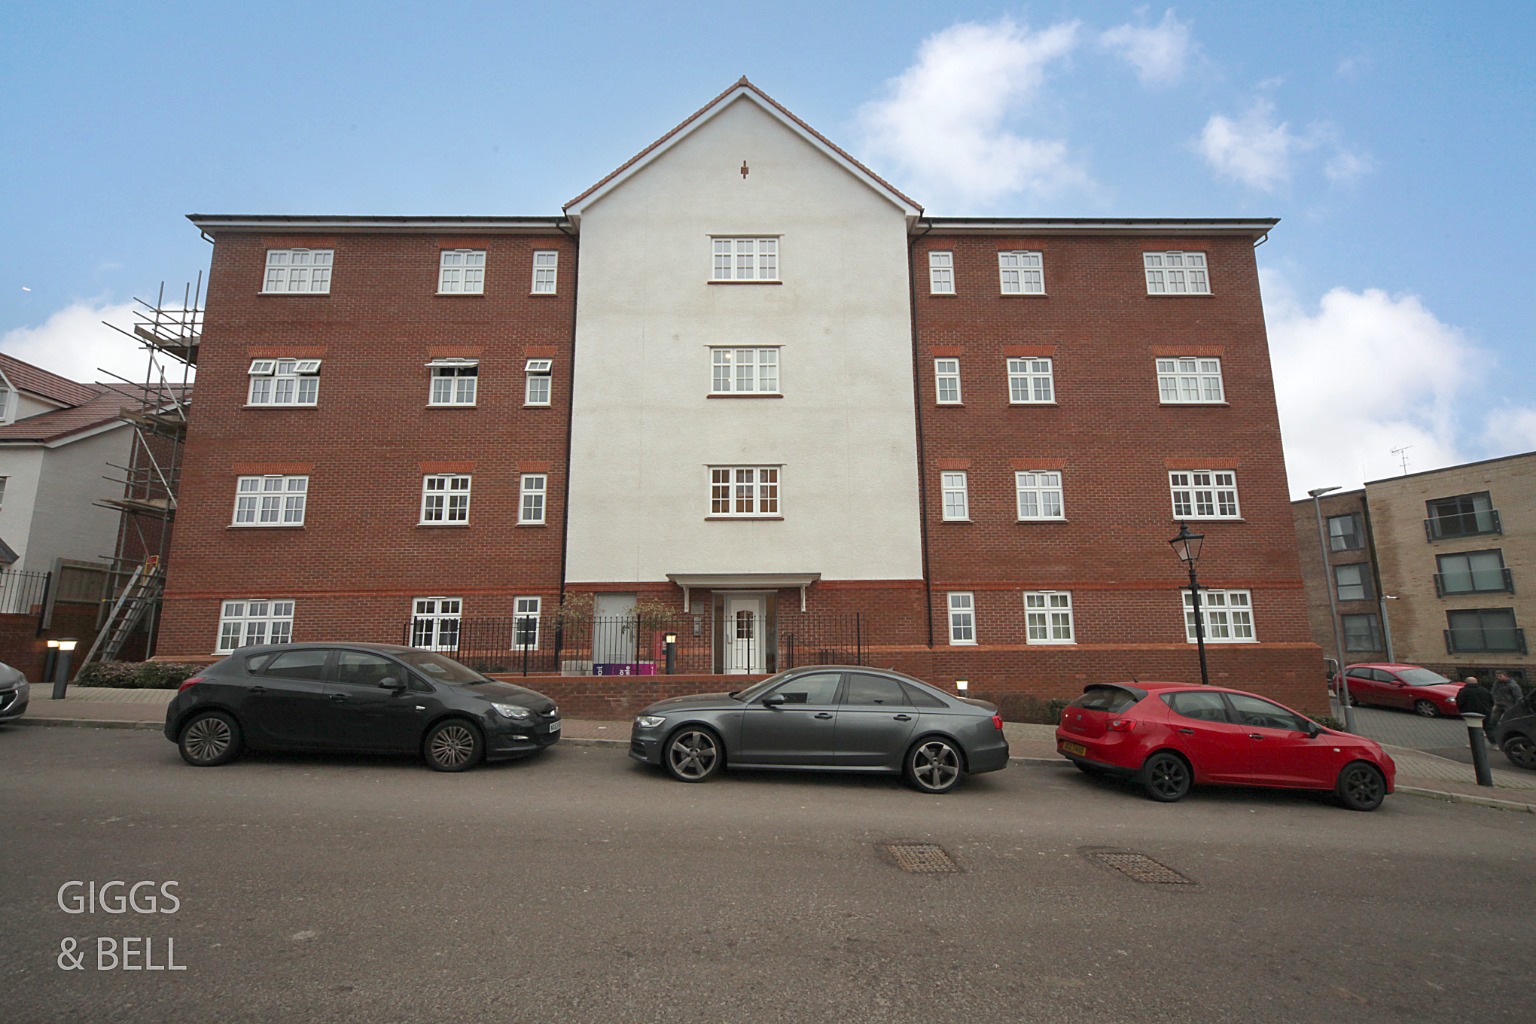 1 bed flat for sale, Luton, LU2 